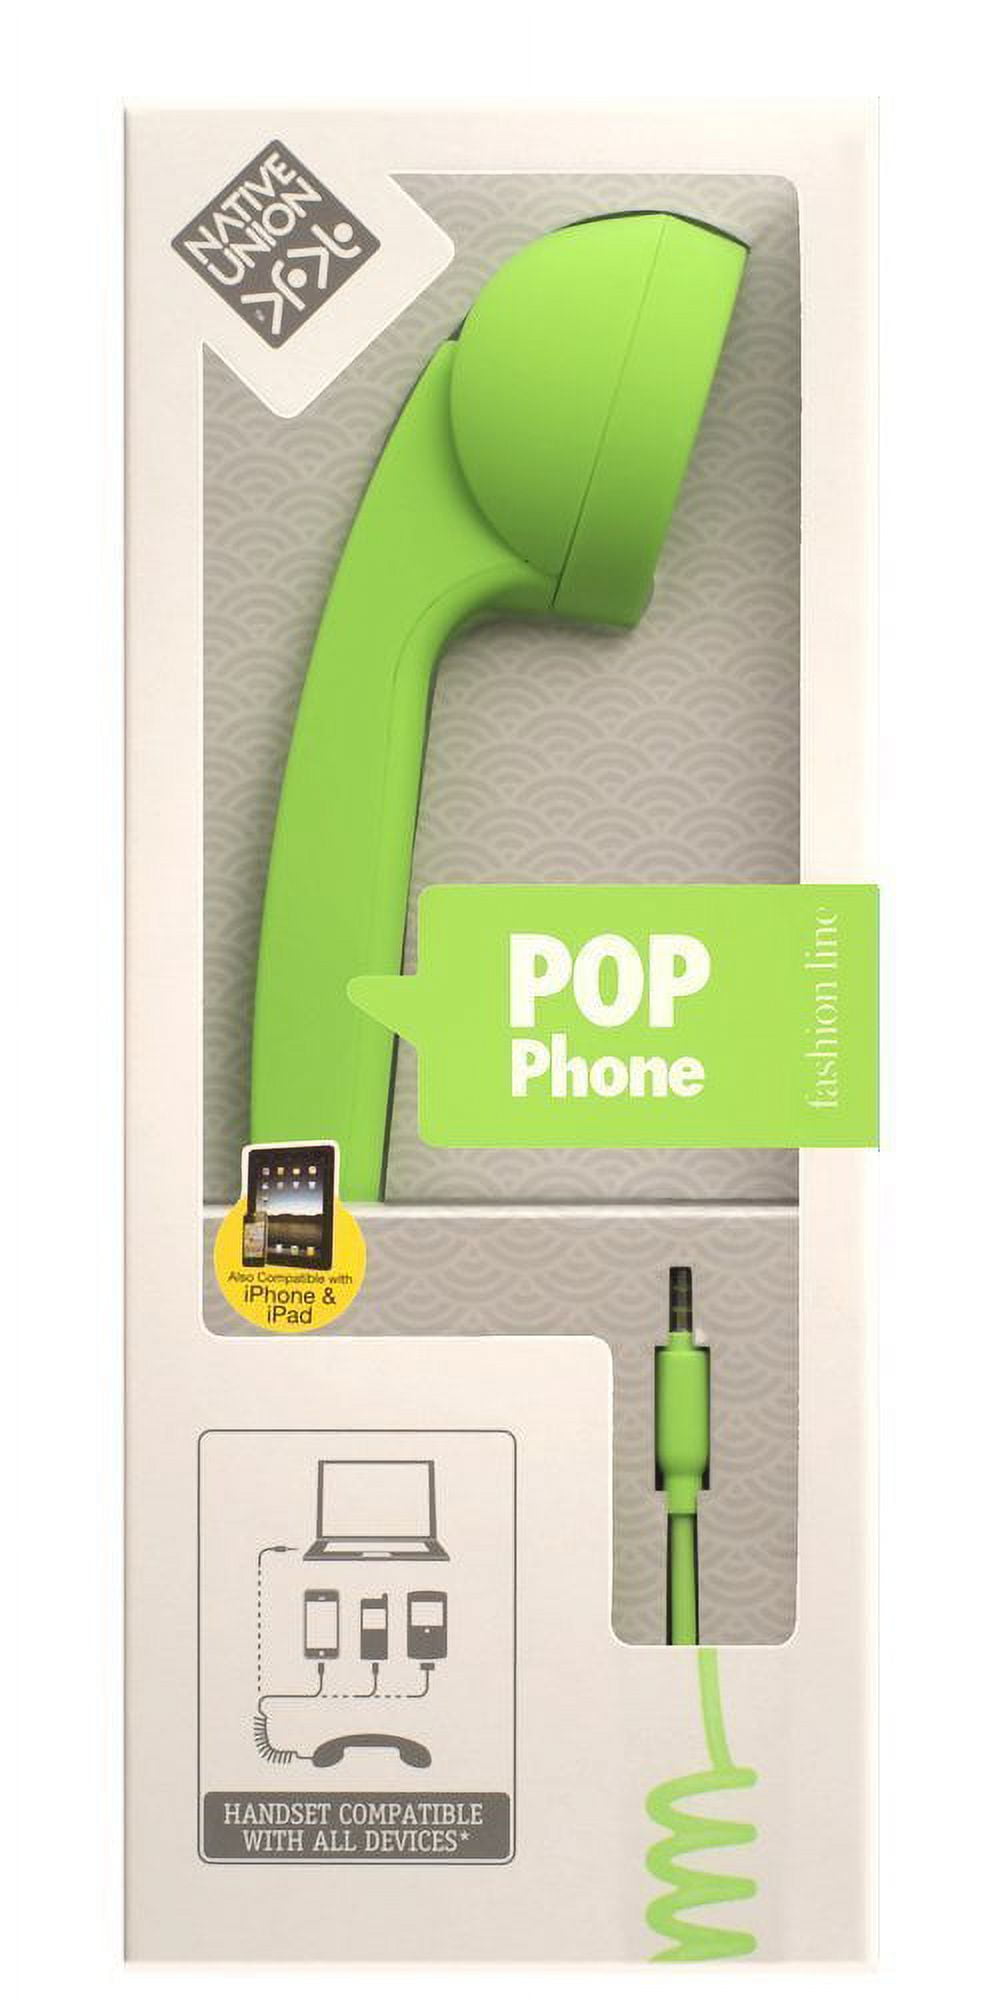 NEW NATIVE UNION Neon Green Pop Phone, hearing-use on all devices  w/warranty